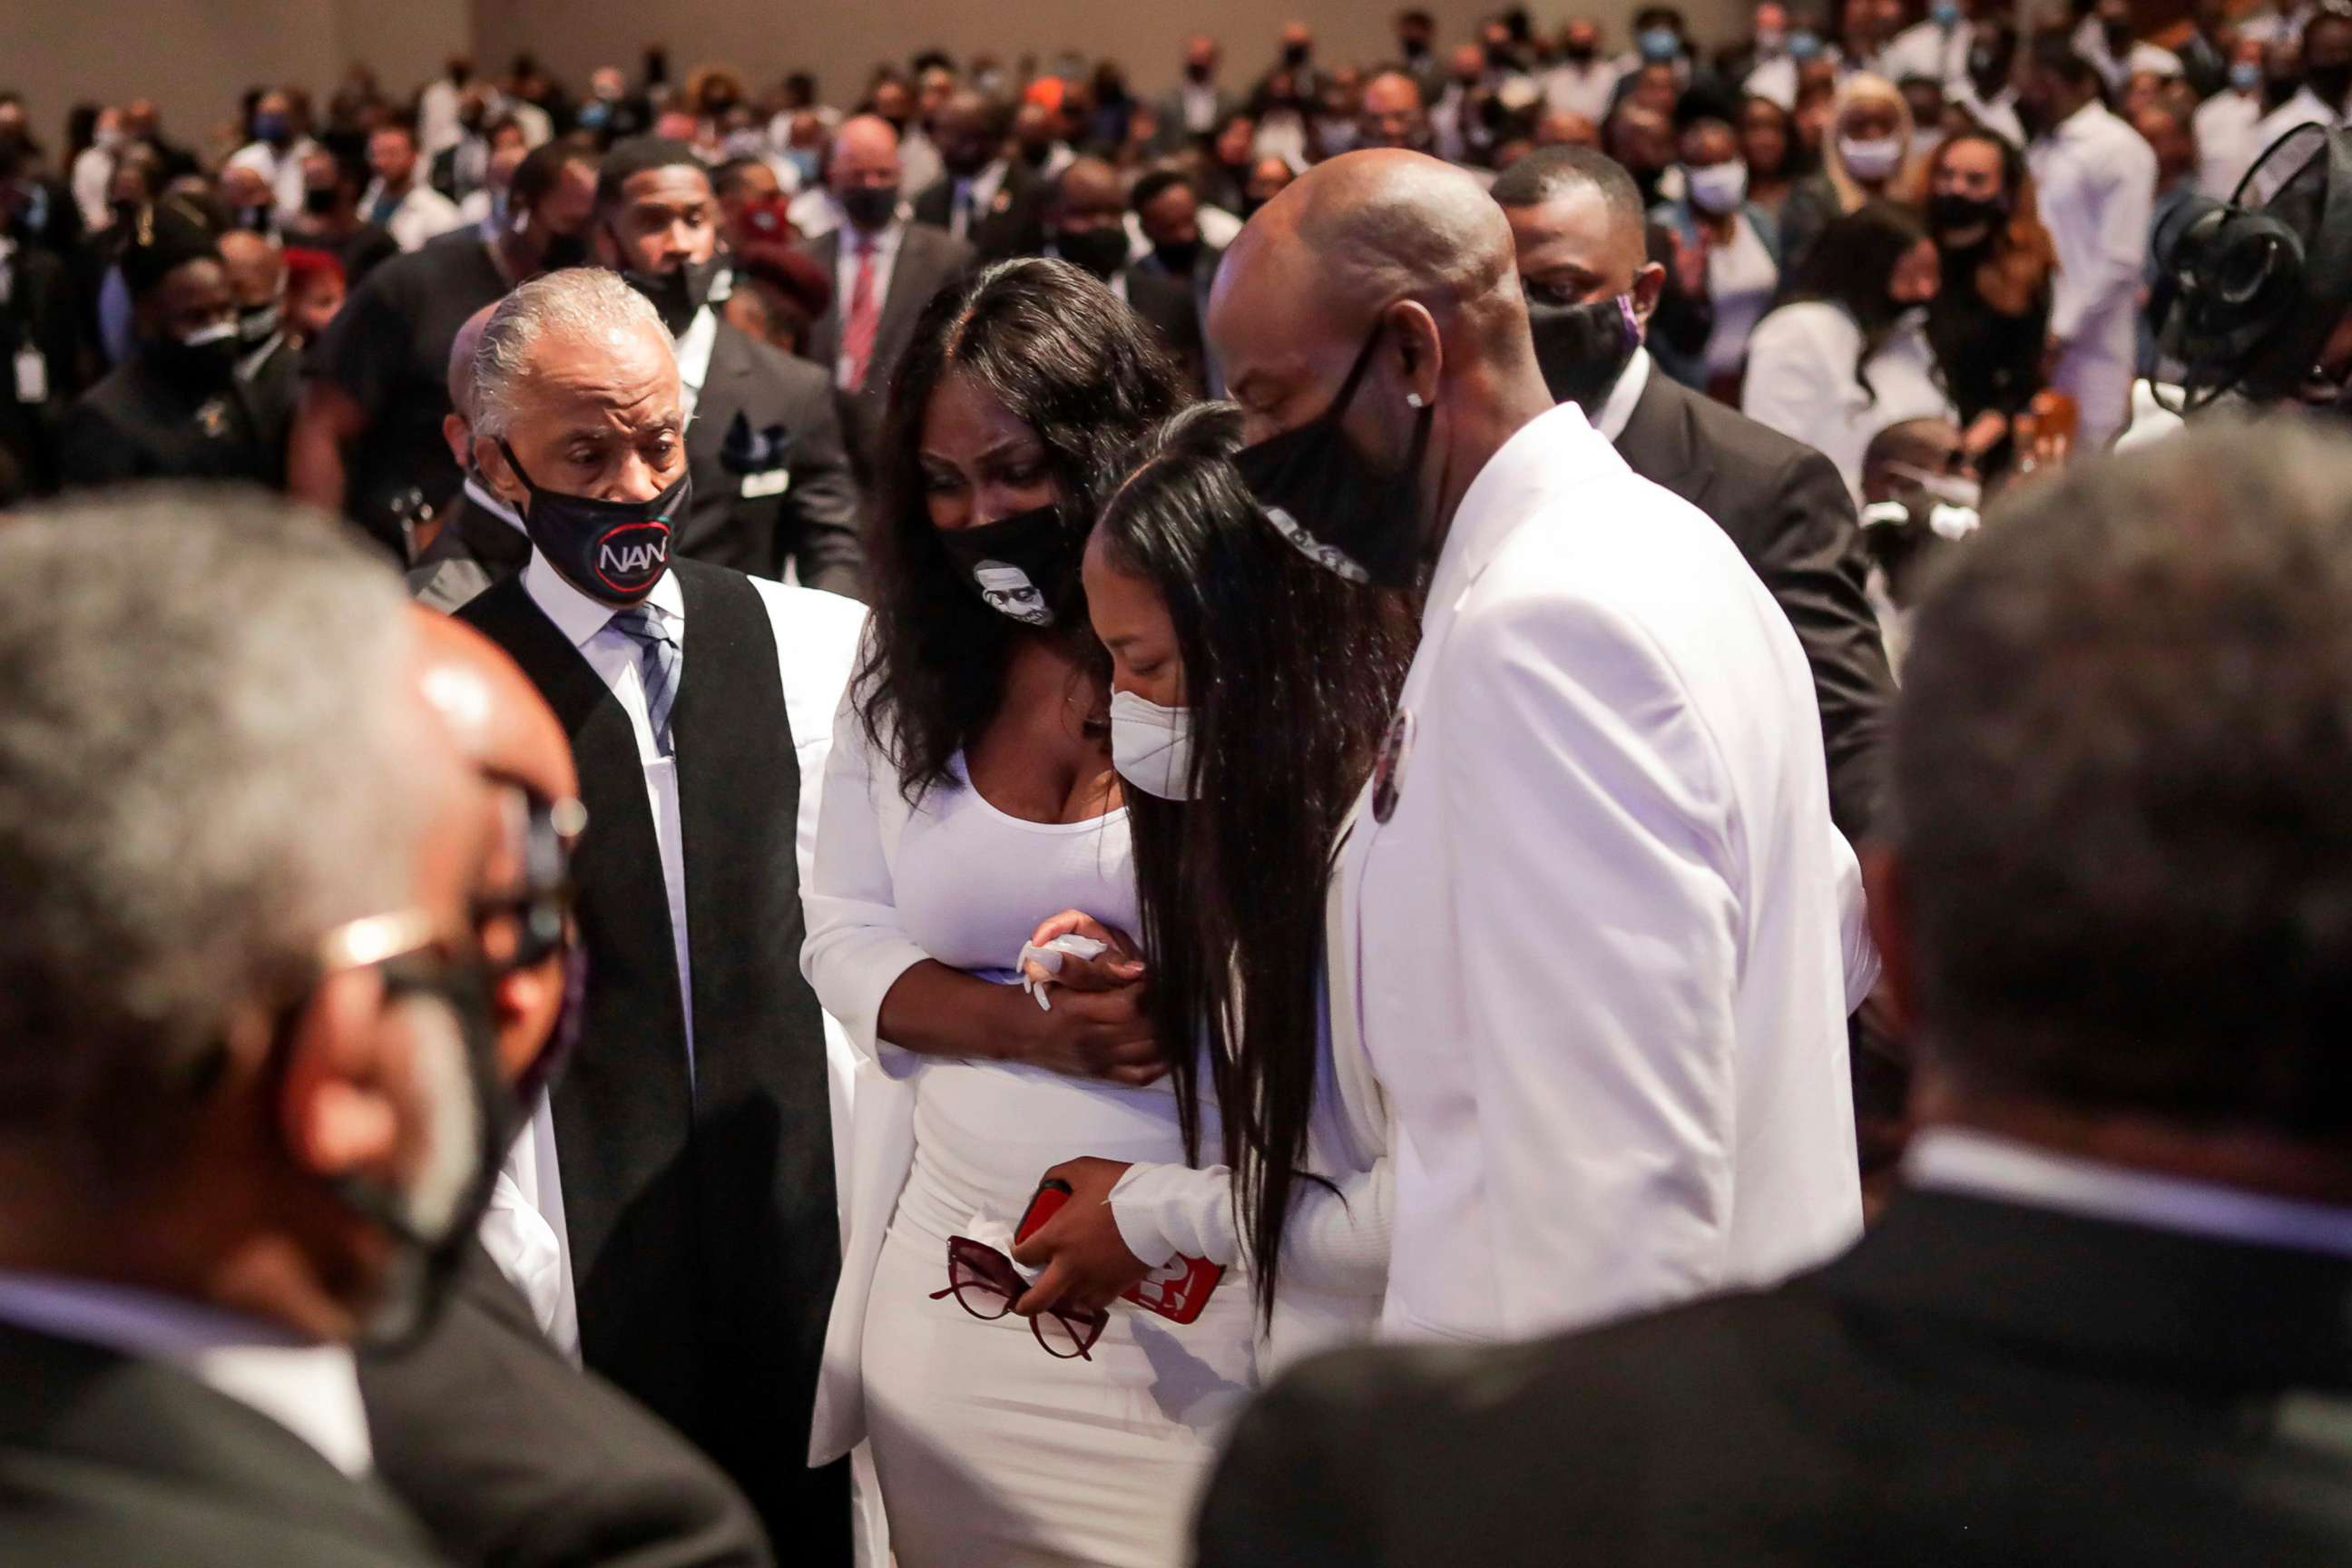 PHOTO: Family members react as they view the casket during the funeral of George Floyd on June 9, 2020, at The Fountain of Praise church in Houston.